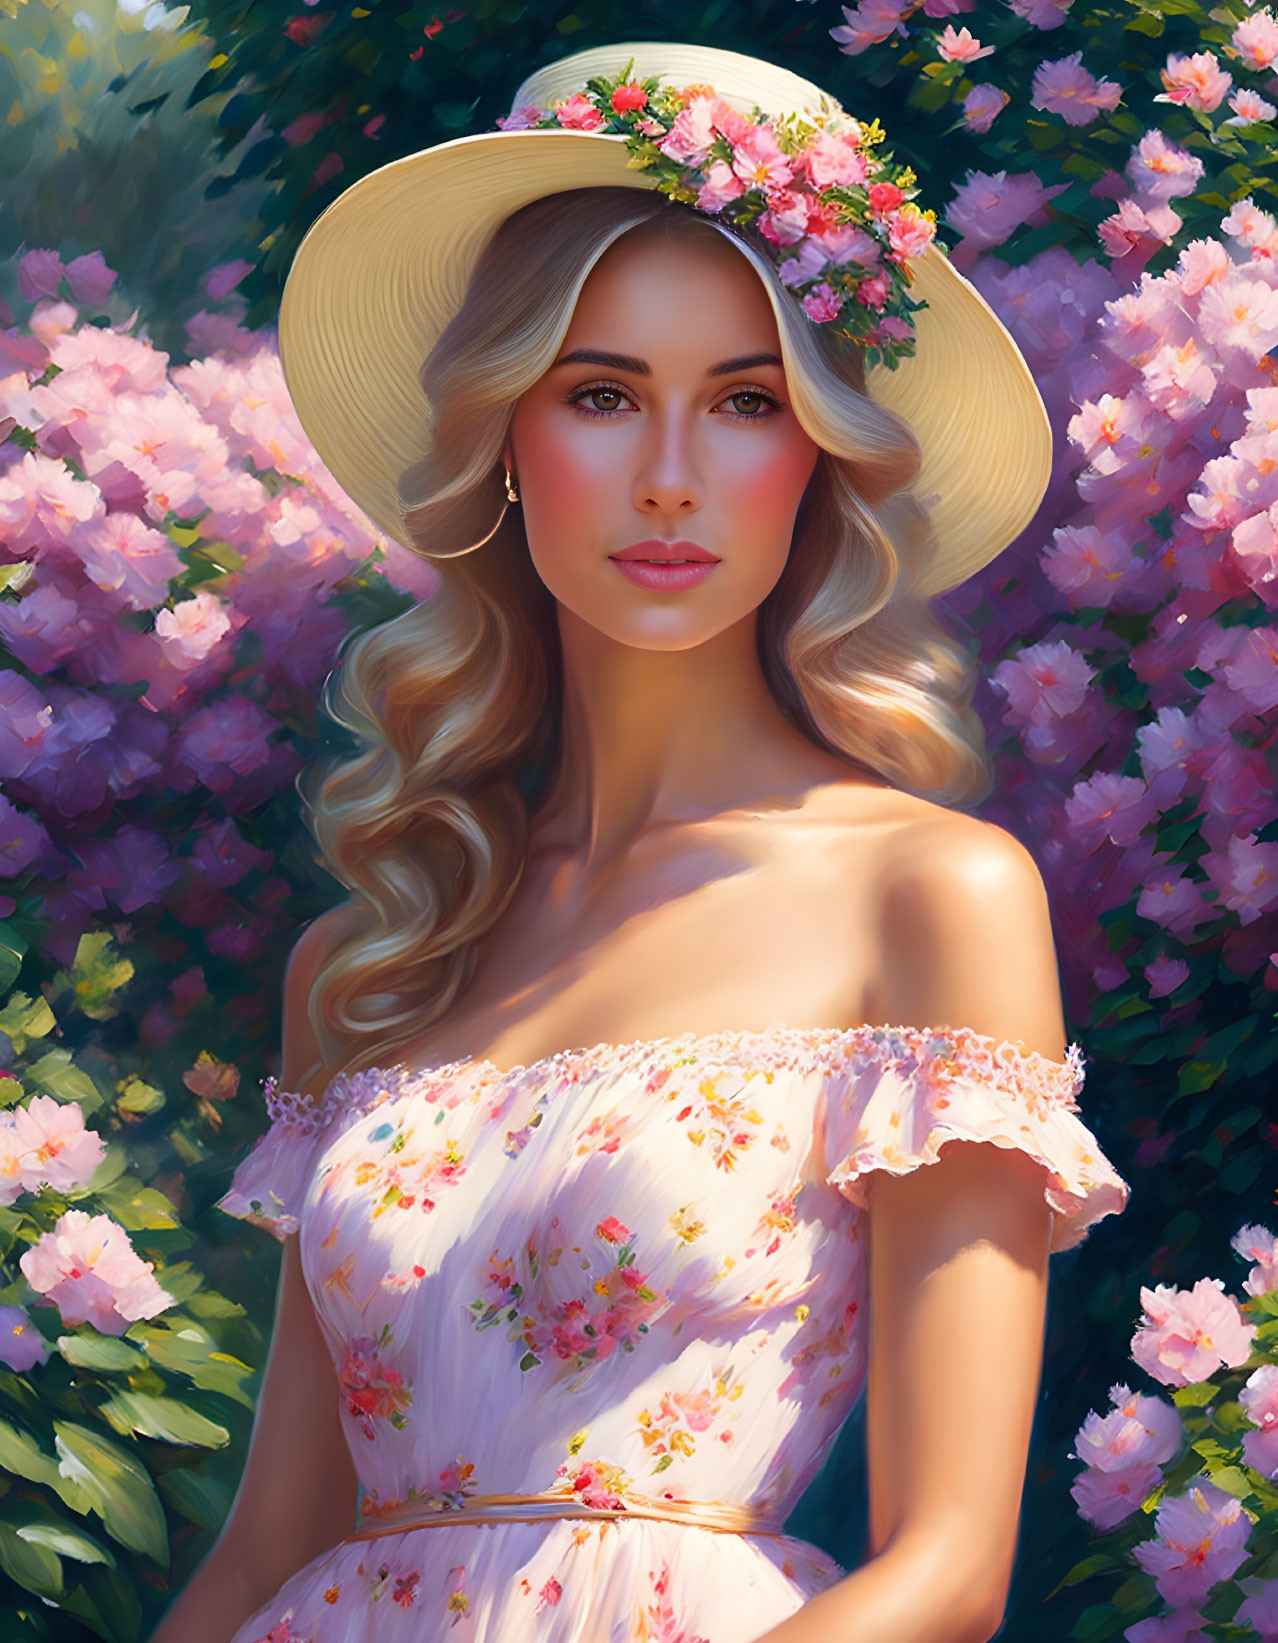 Blonde woman in floral attire with wide-brimmed hat among pink blossoms